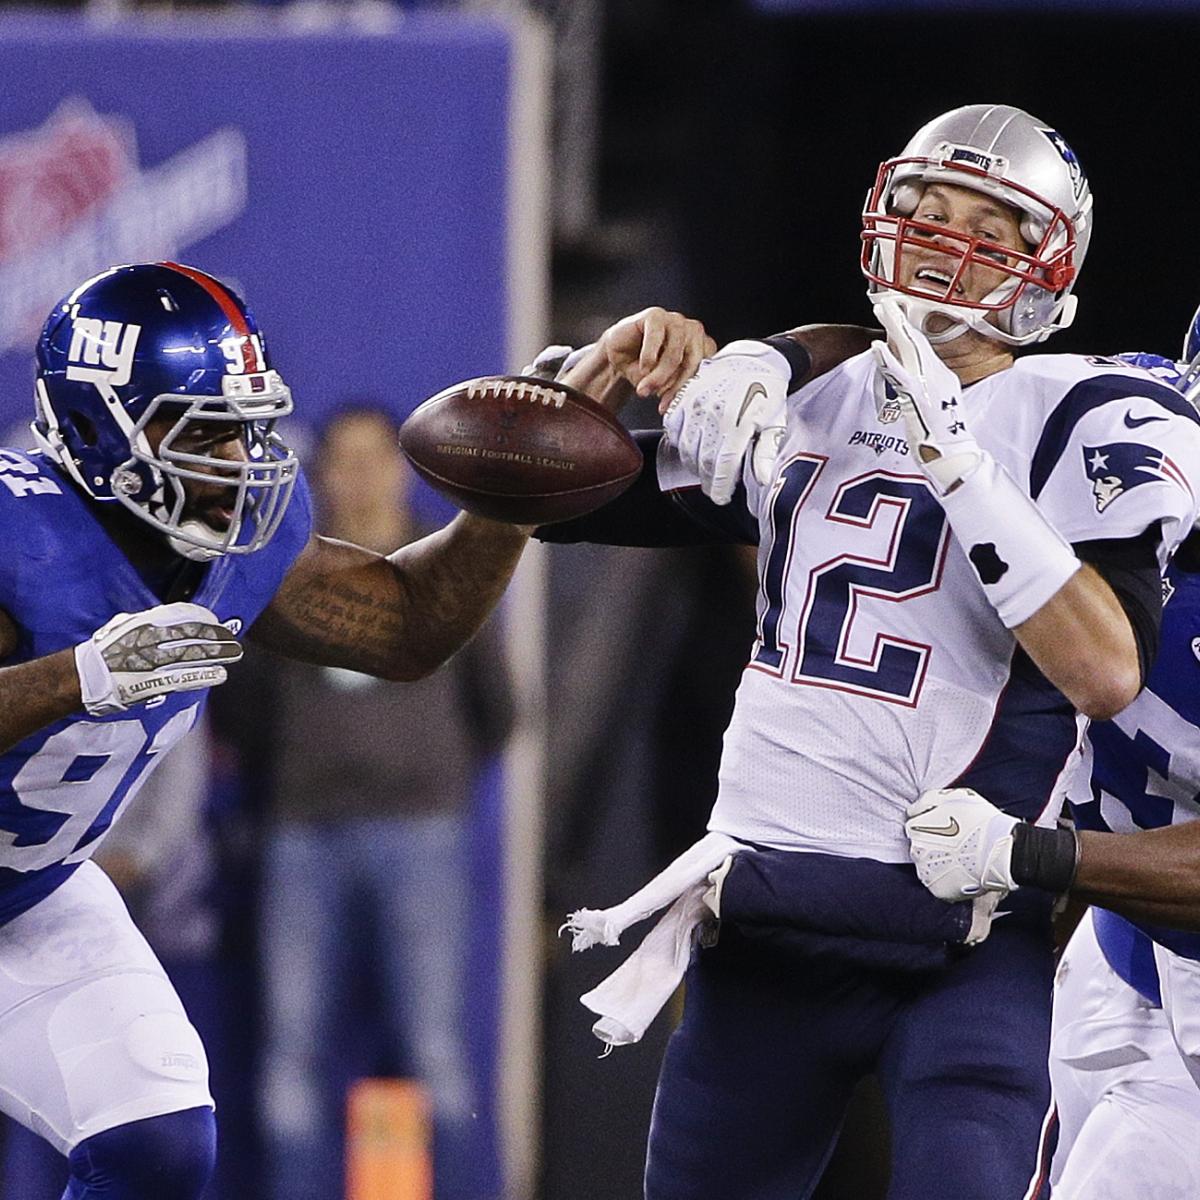 Giants-Patriots: 6 winners, 4 losers from the Giants' final